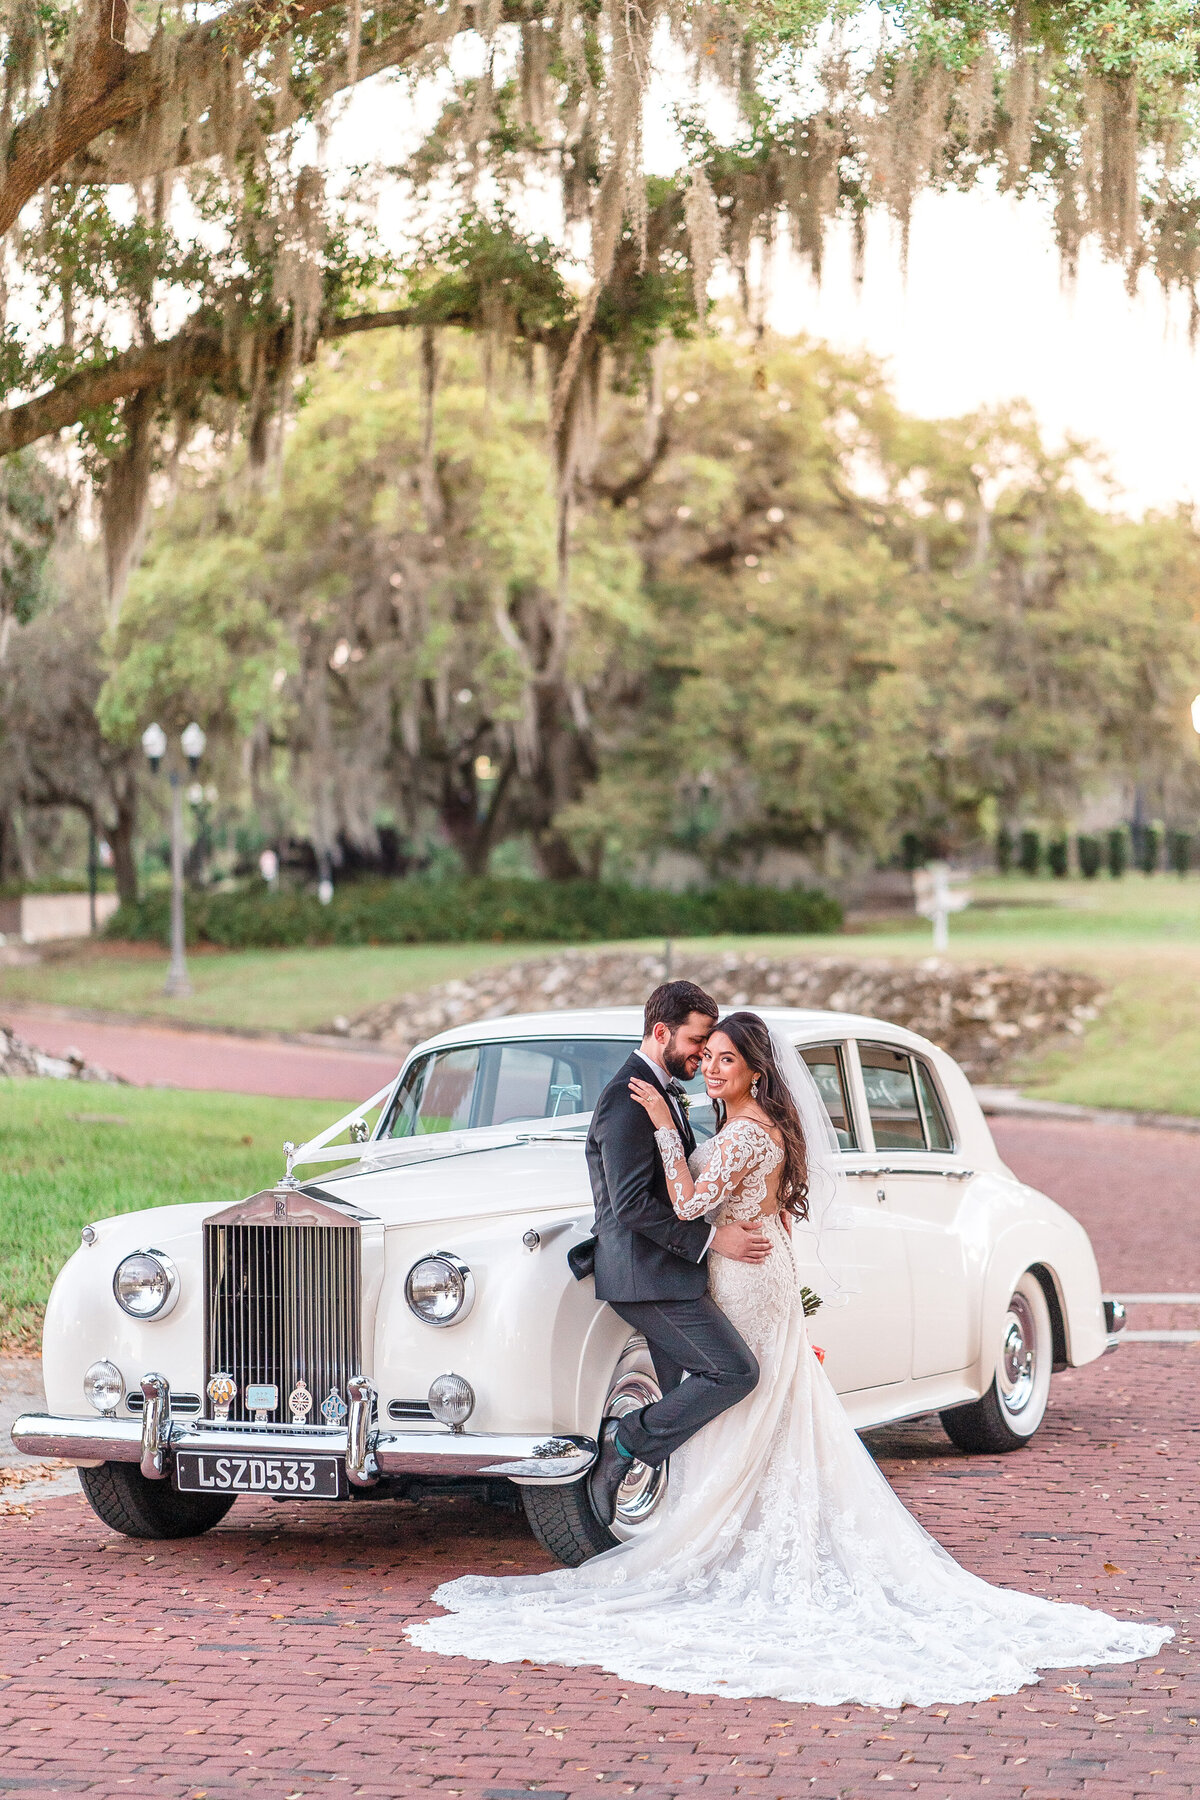 Wedding photography and videography in Orlando with a vintage car